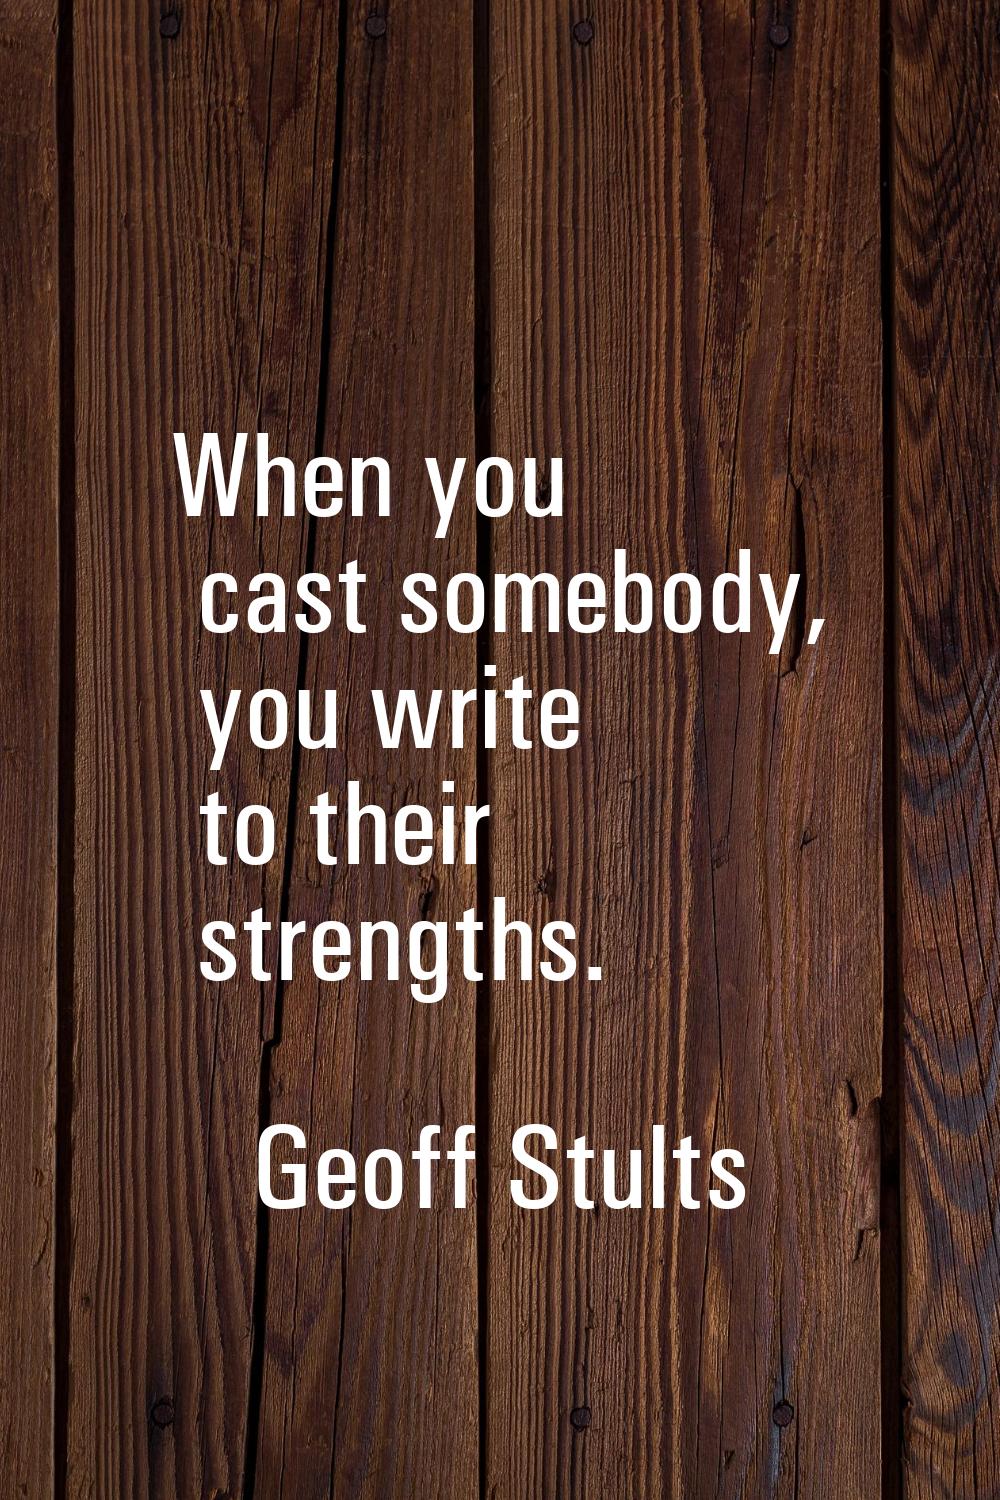 When you cast somebody, you write to their strengths.